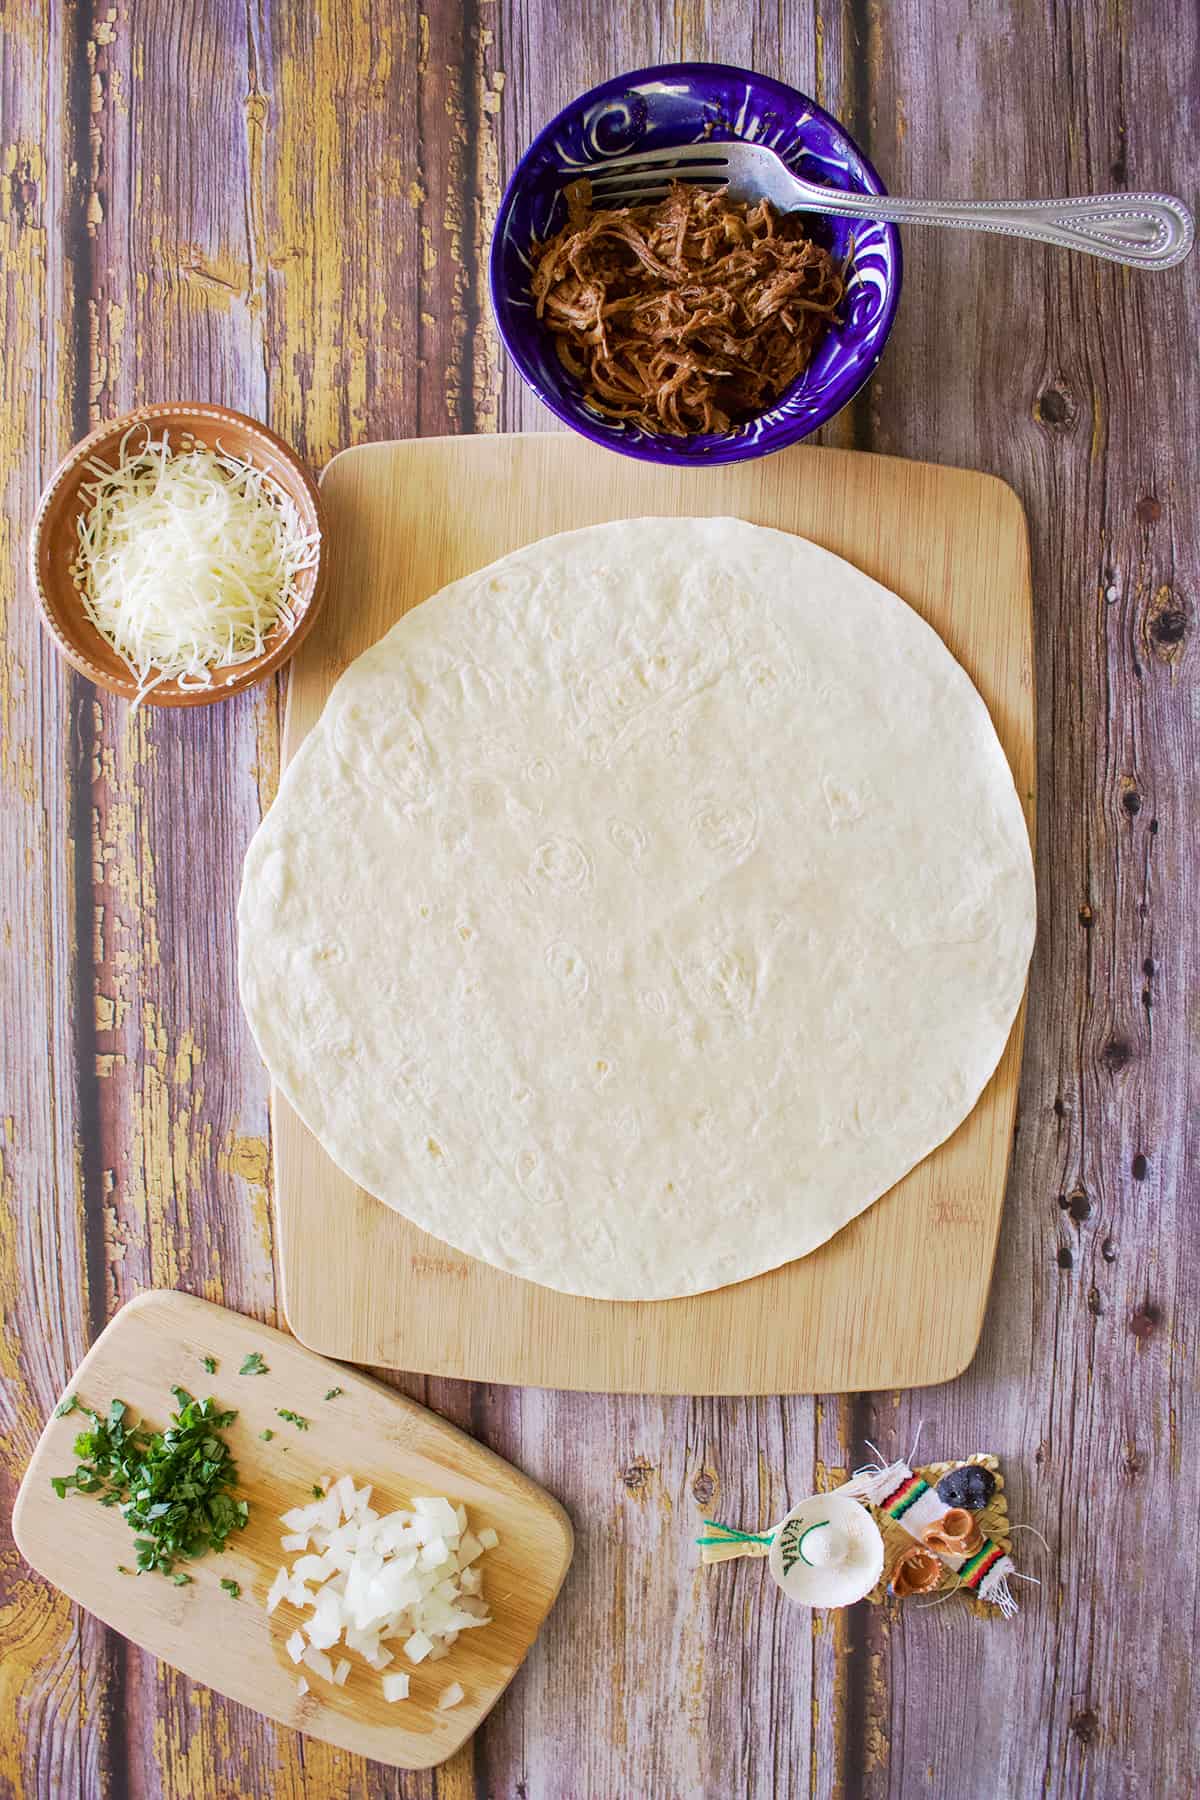 A burrito-sized flour tortilla next to the filling ingredients.